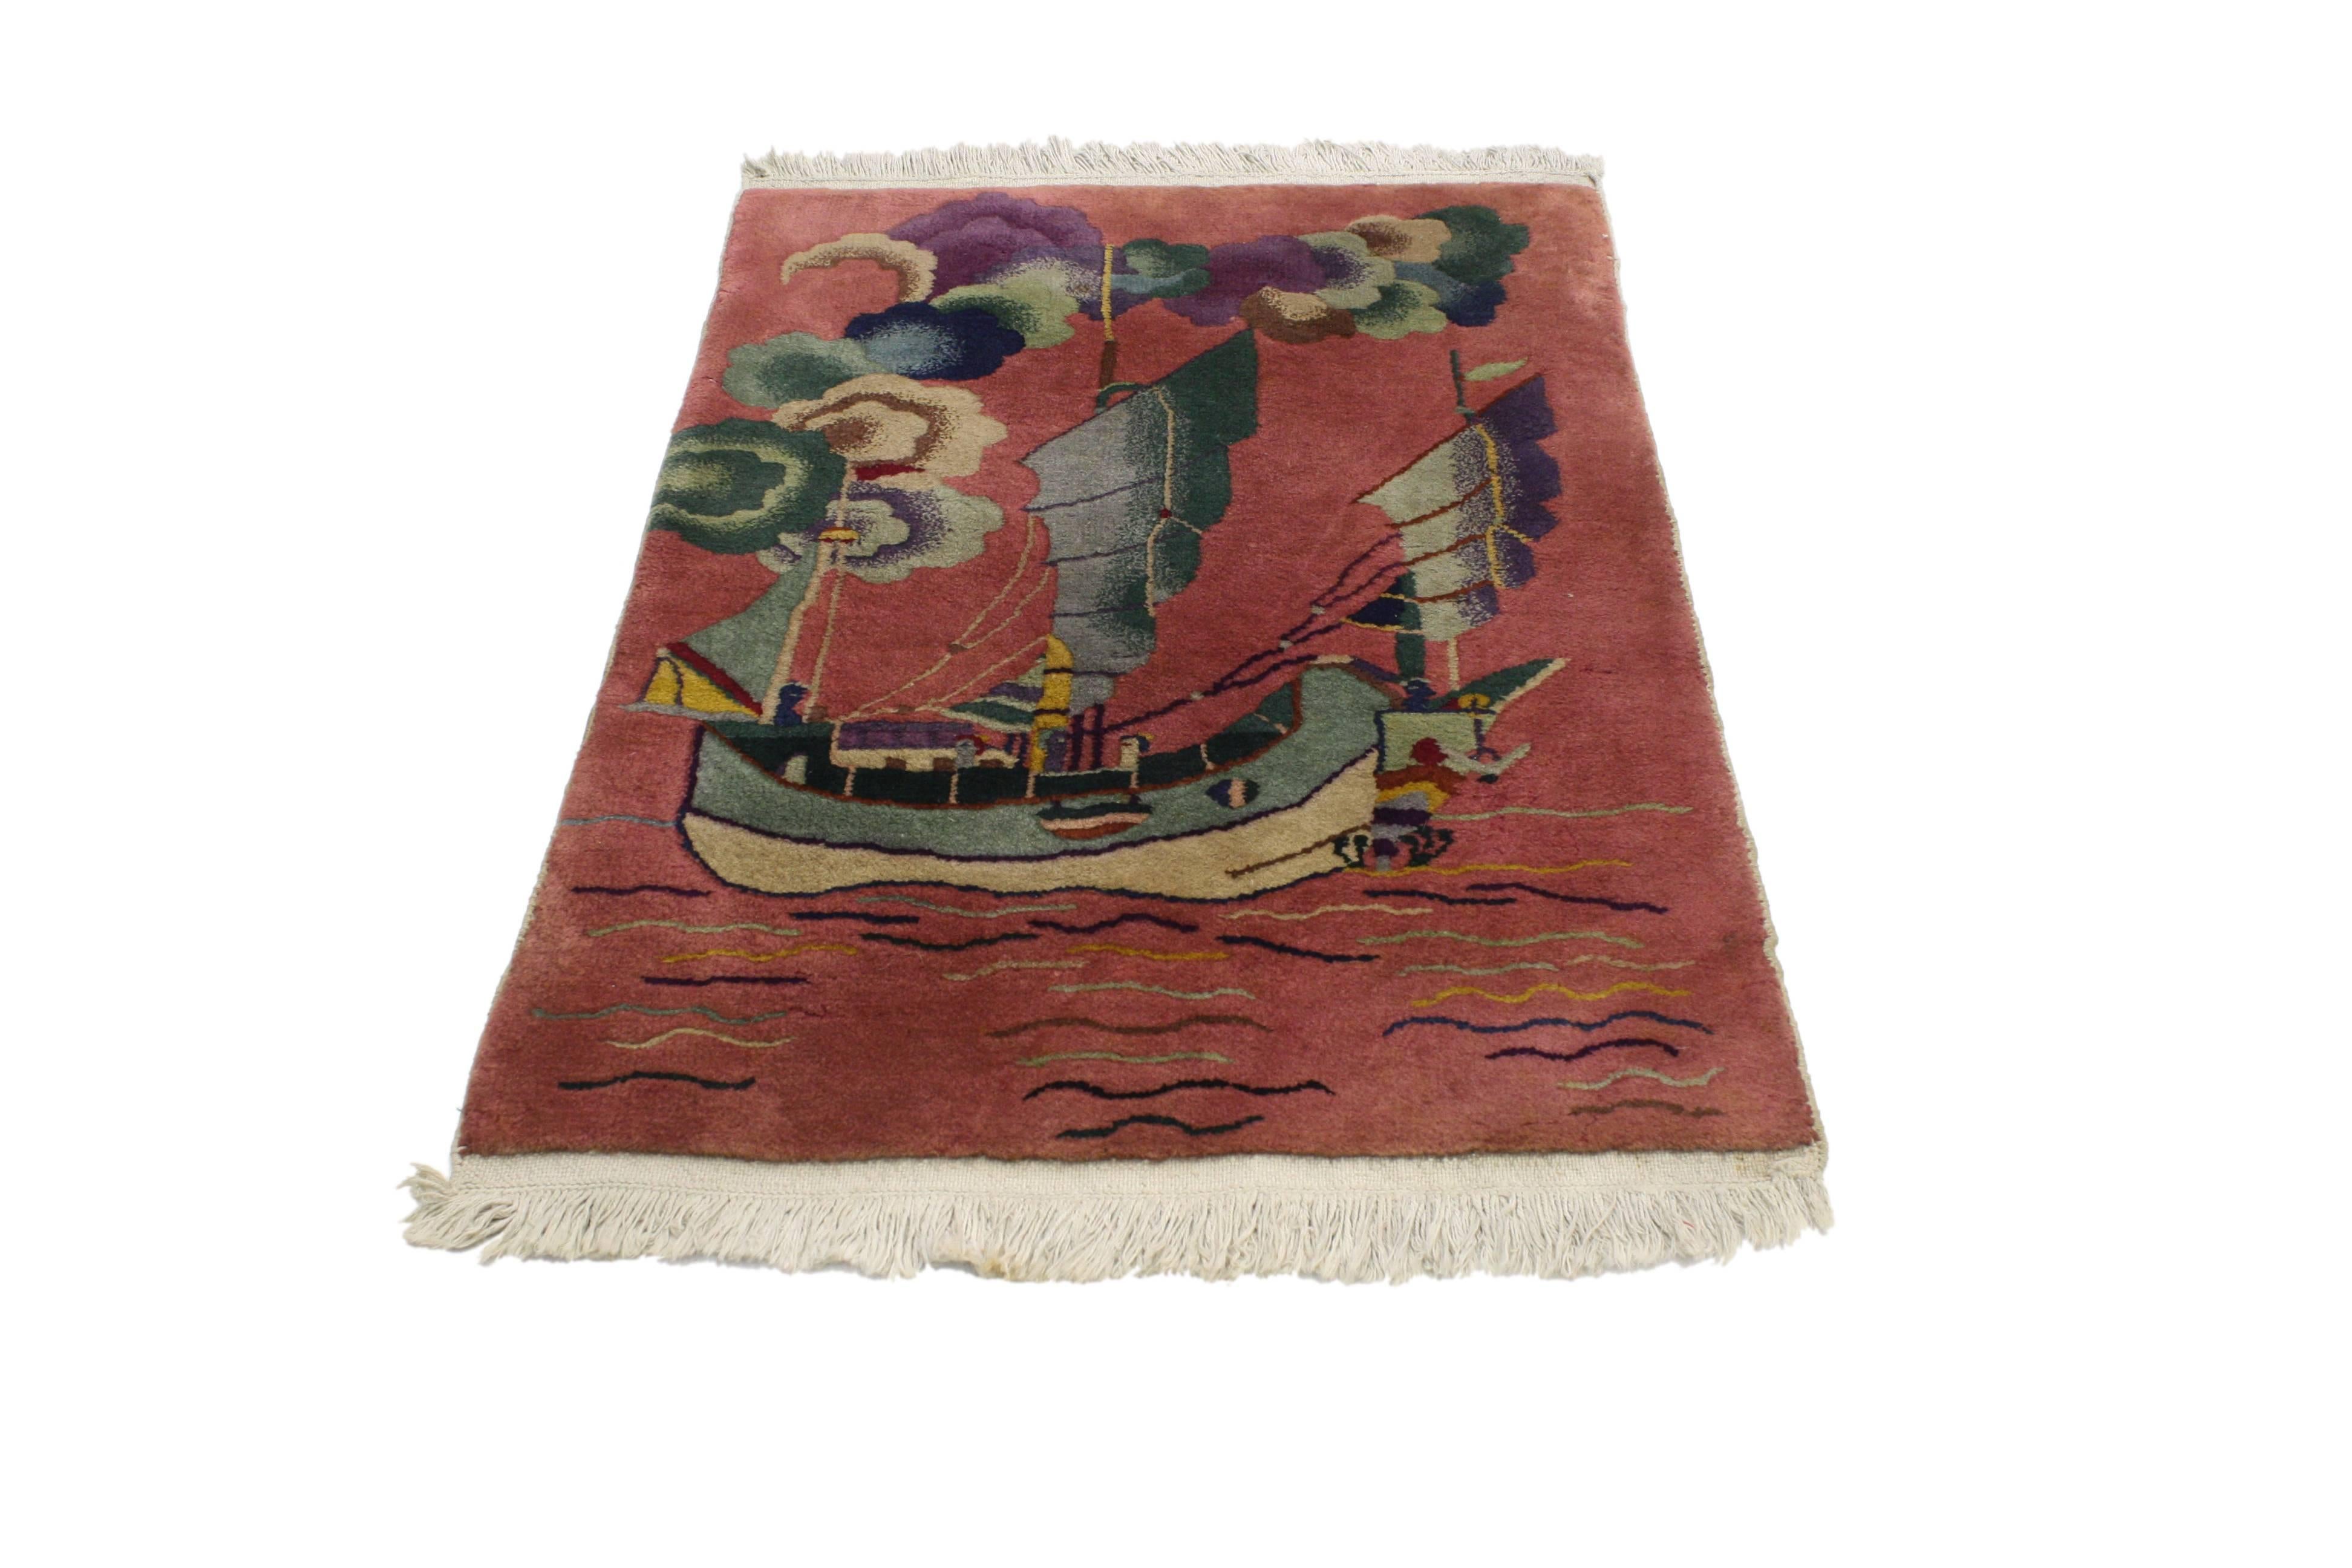 Hand-Knotted Antique Chinese Art Deco Rug with Sailing Ship, Maximalism Asian Modern Tapestry